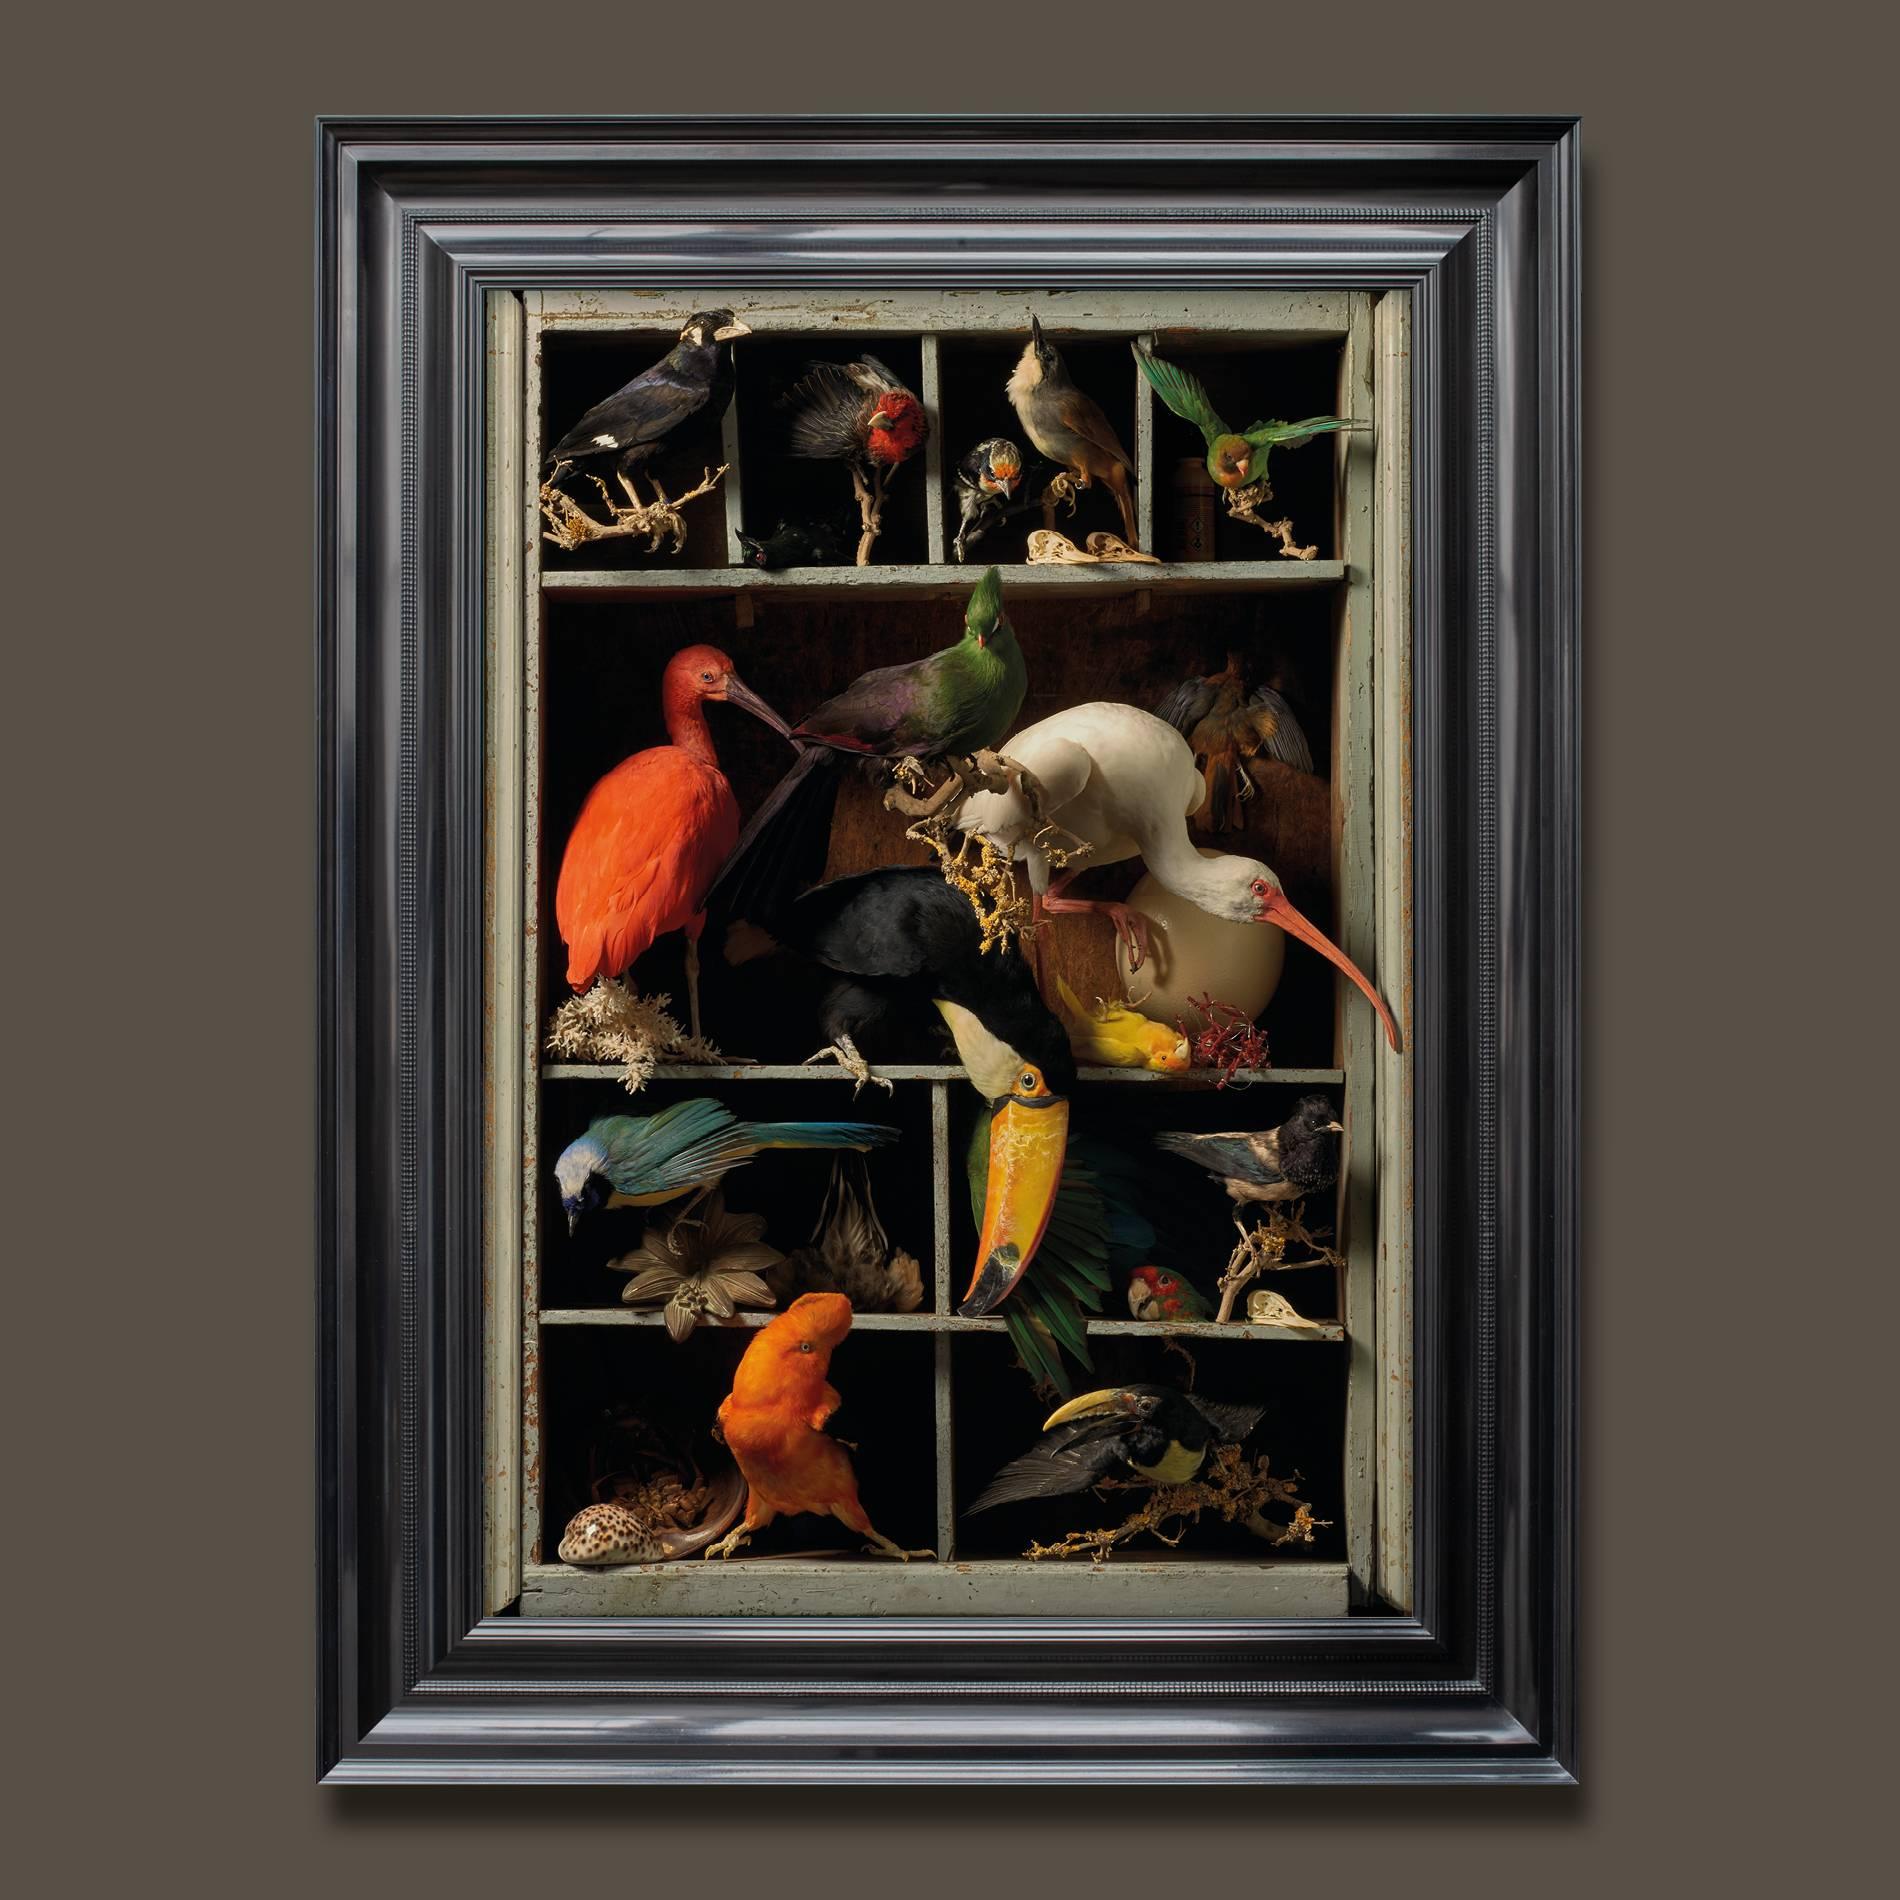 The third series of photographs by fine Taxidermists Sinke & Van Tongeren

After observing and analysing so many 17th century paintings, they were inspired to create a new series of work focused on still life masterpieces. They chose photography as